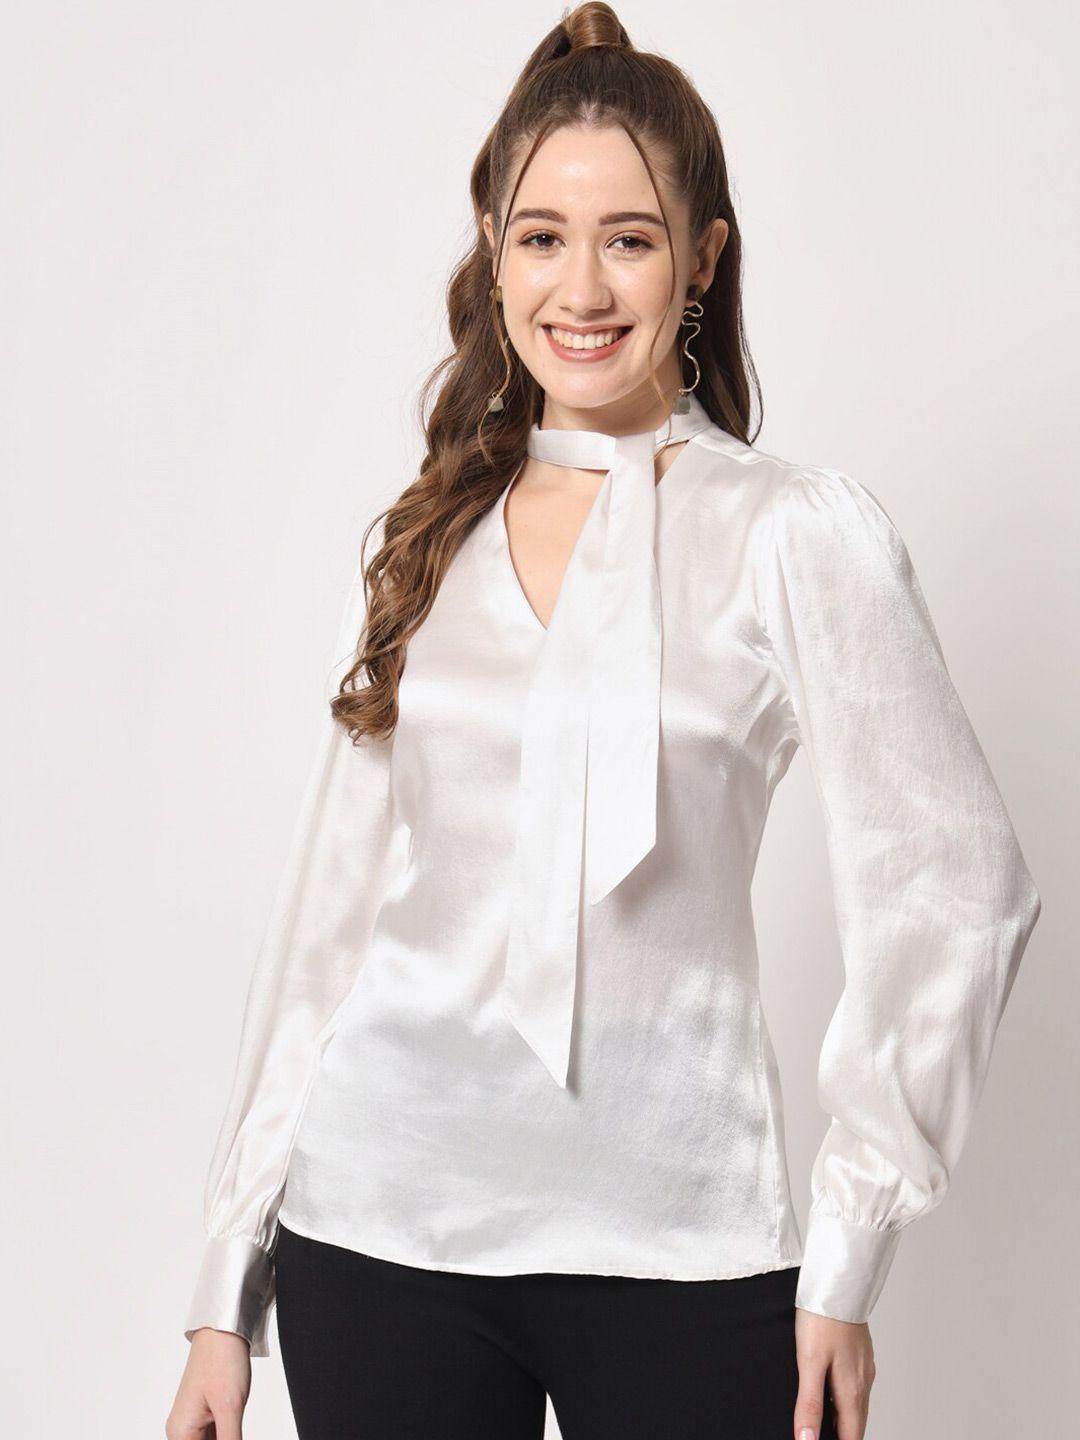 CHARMGAL Tie-Up Neck Cuffed Sleeves Satin Top